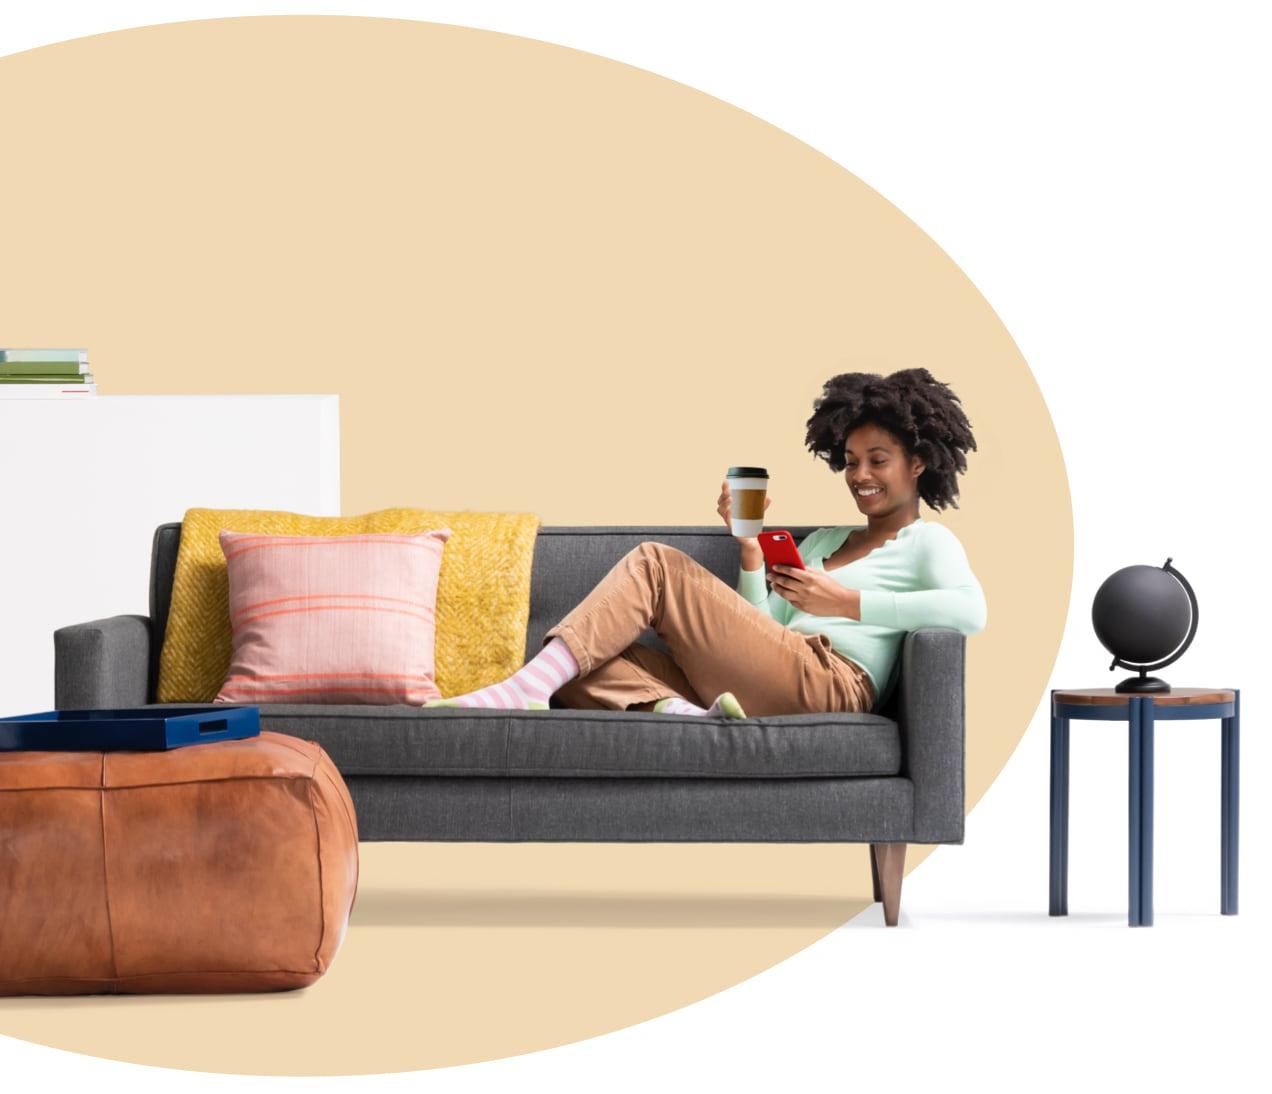 Woman sitting on couch holding a coffee while reading her iPhone about what renters insurance covers. A globe sits on side table.